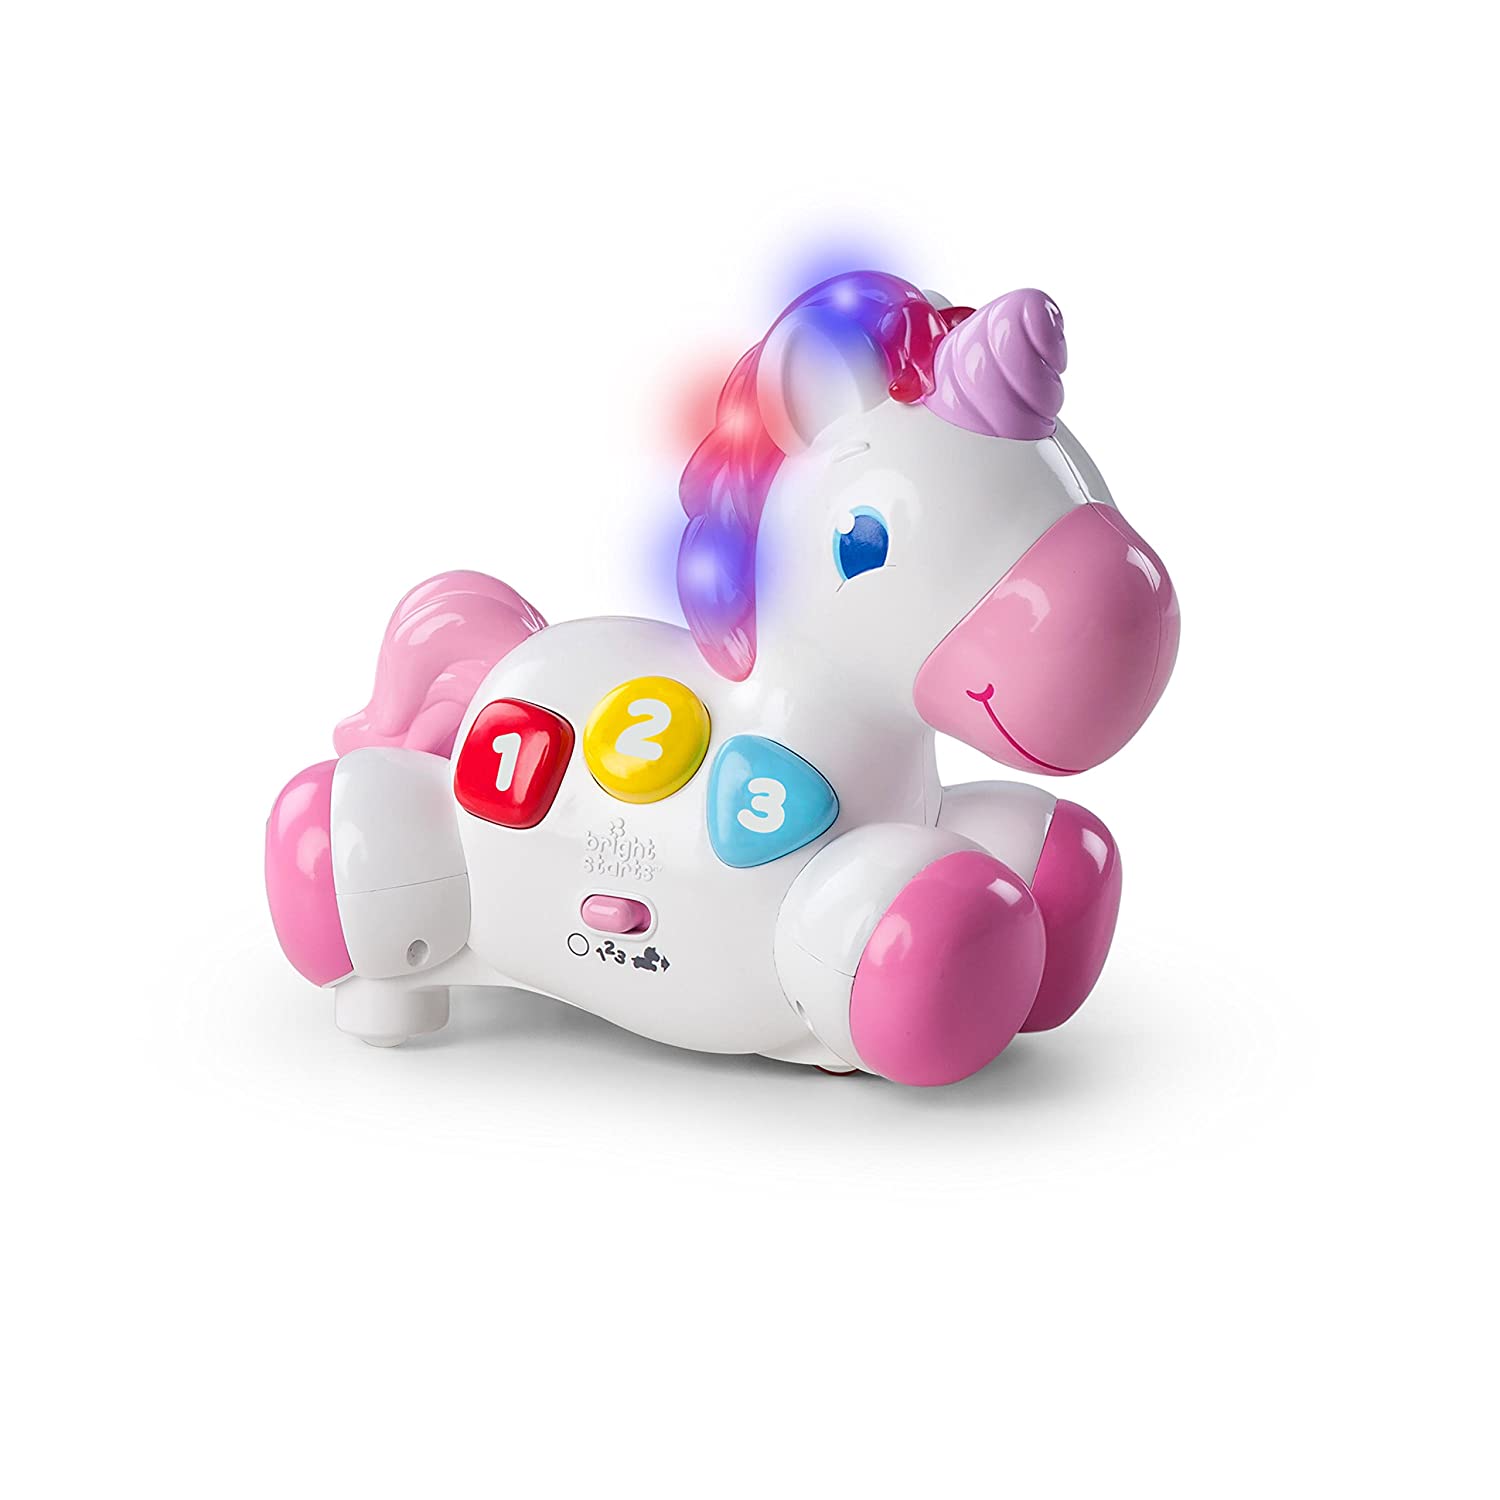 Bright Starts Rock & Glow Unicorn Toy w/ Lights and Melodies $10 + Free Shipping w/ Amazon Prime or Orders $25+